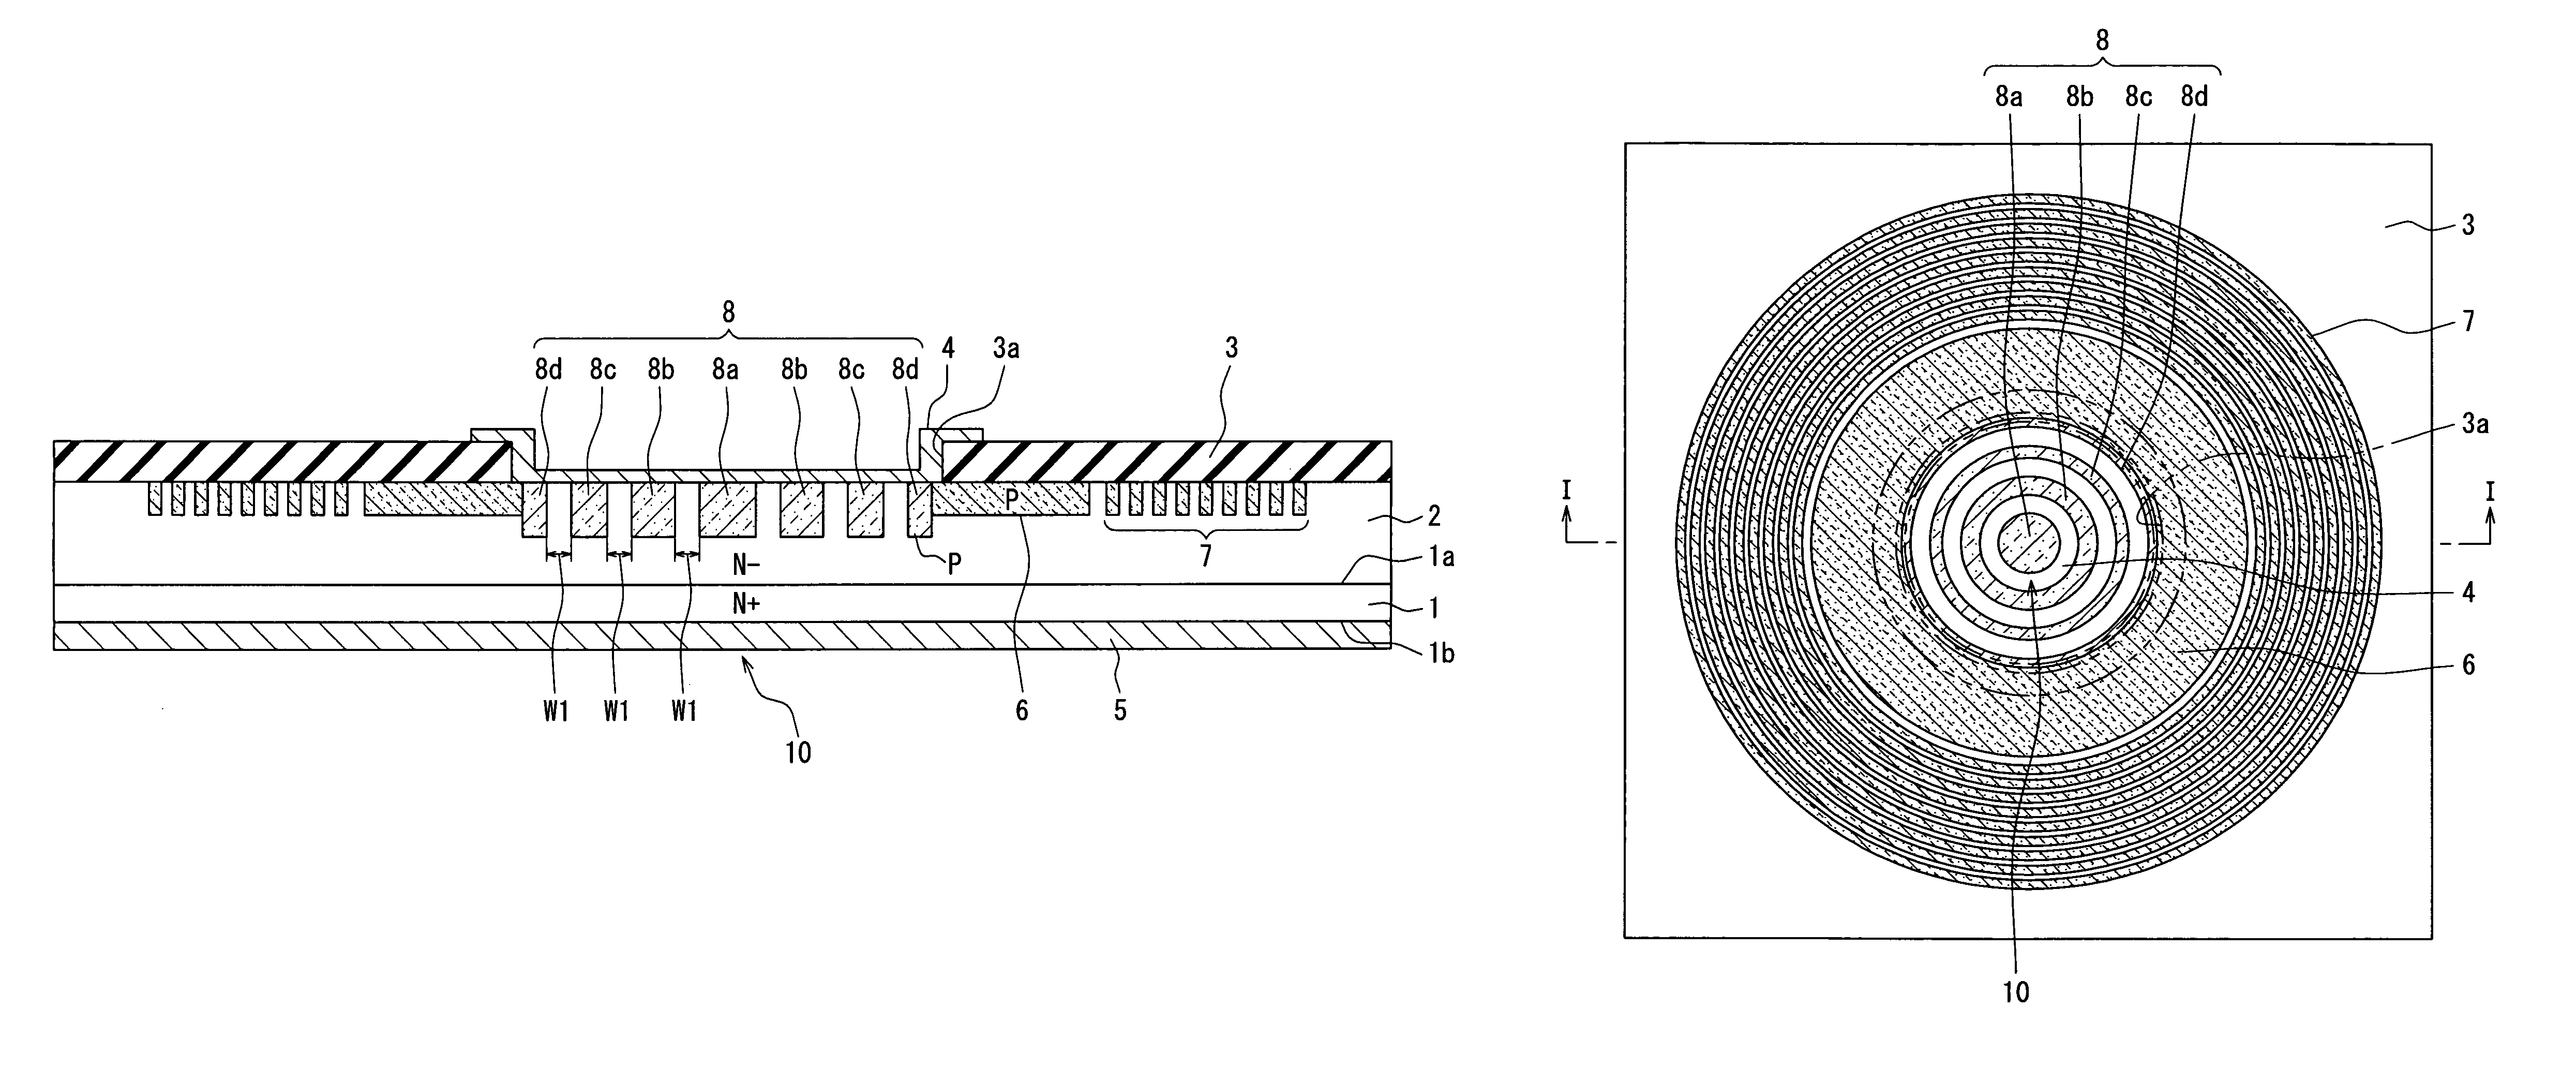 Silicon carbide semiconductor device having junction barrier Schottky diode